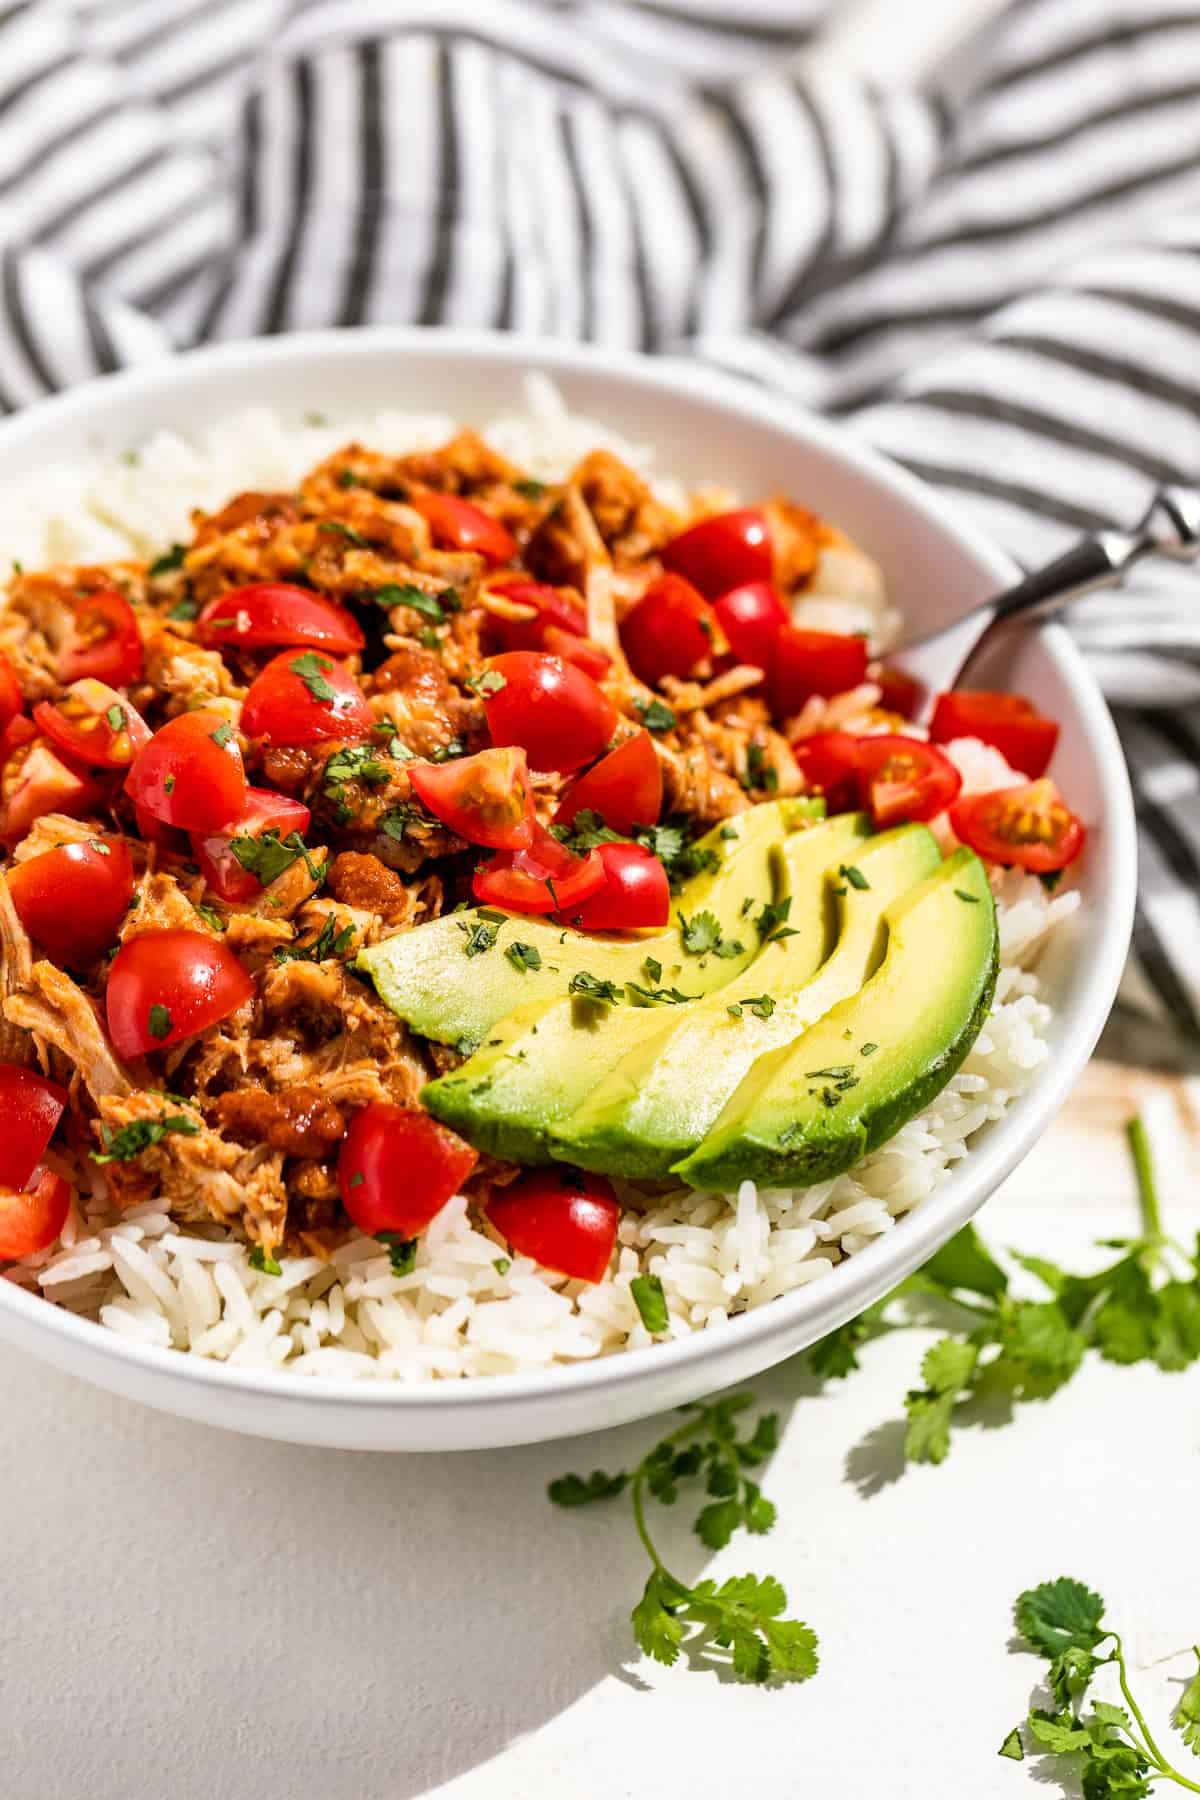 Side view of shredded chicken Tinga over steamed rice topped with chopped tomatoes, cilantro, and sliced avocado in a white bowl.